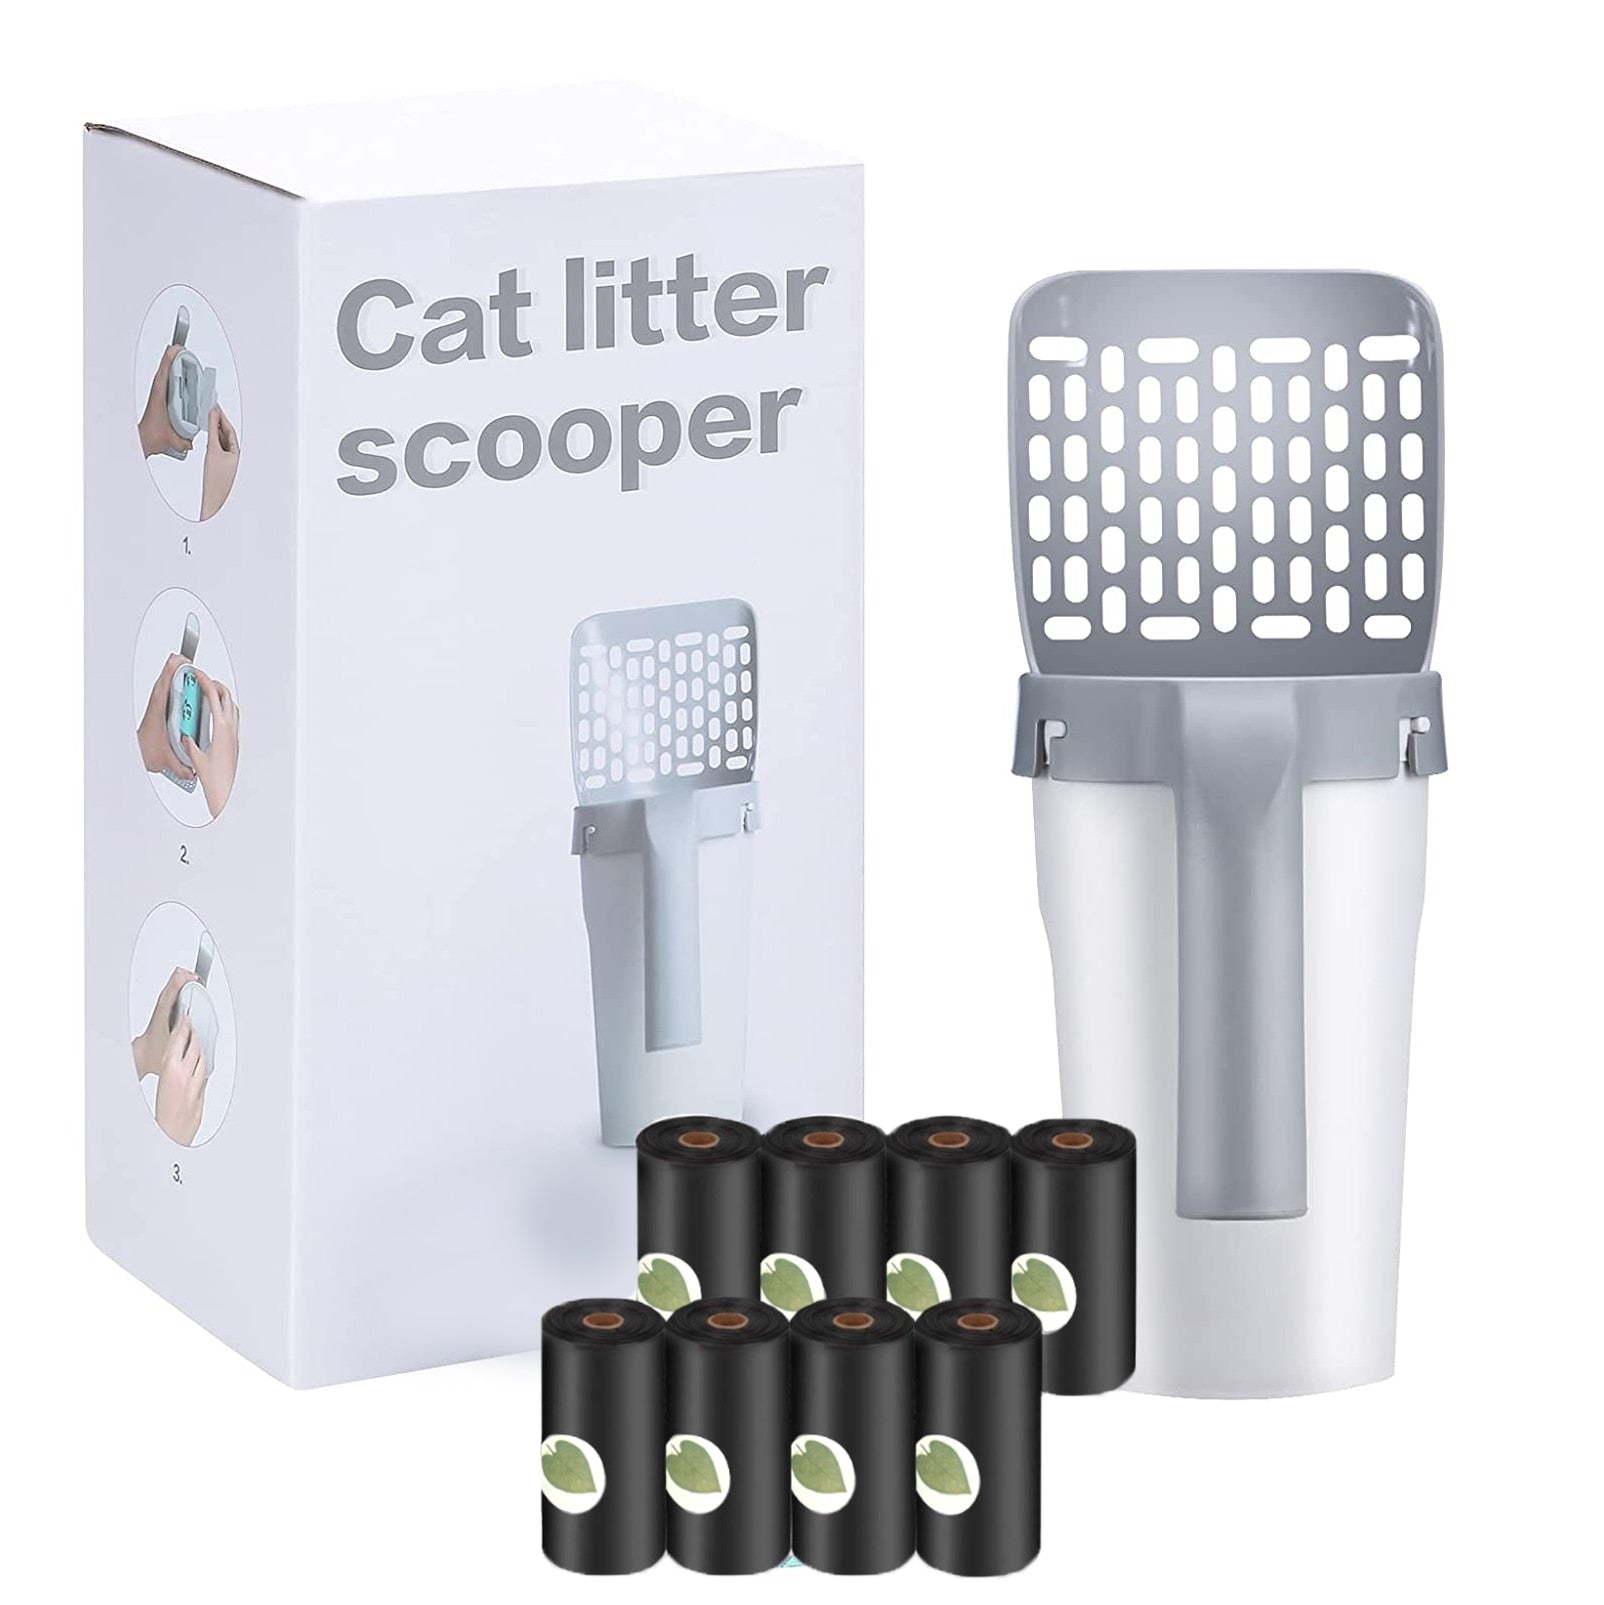 Litter Scoop Self-cleaning Litter Box for Pet